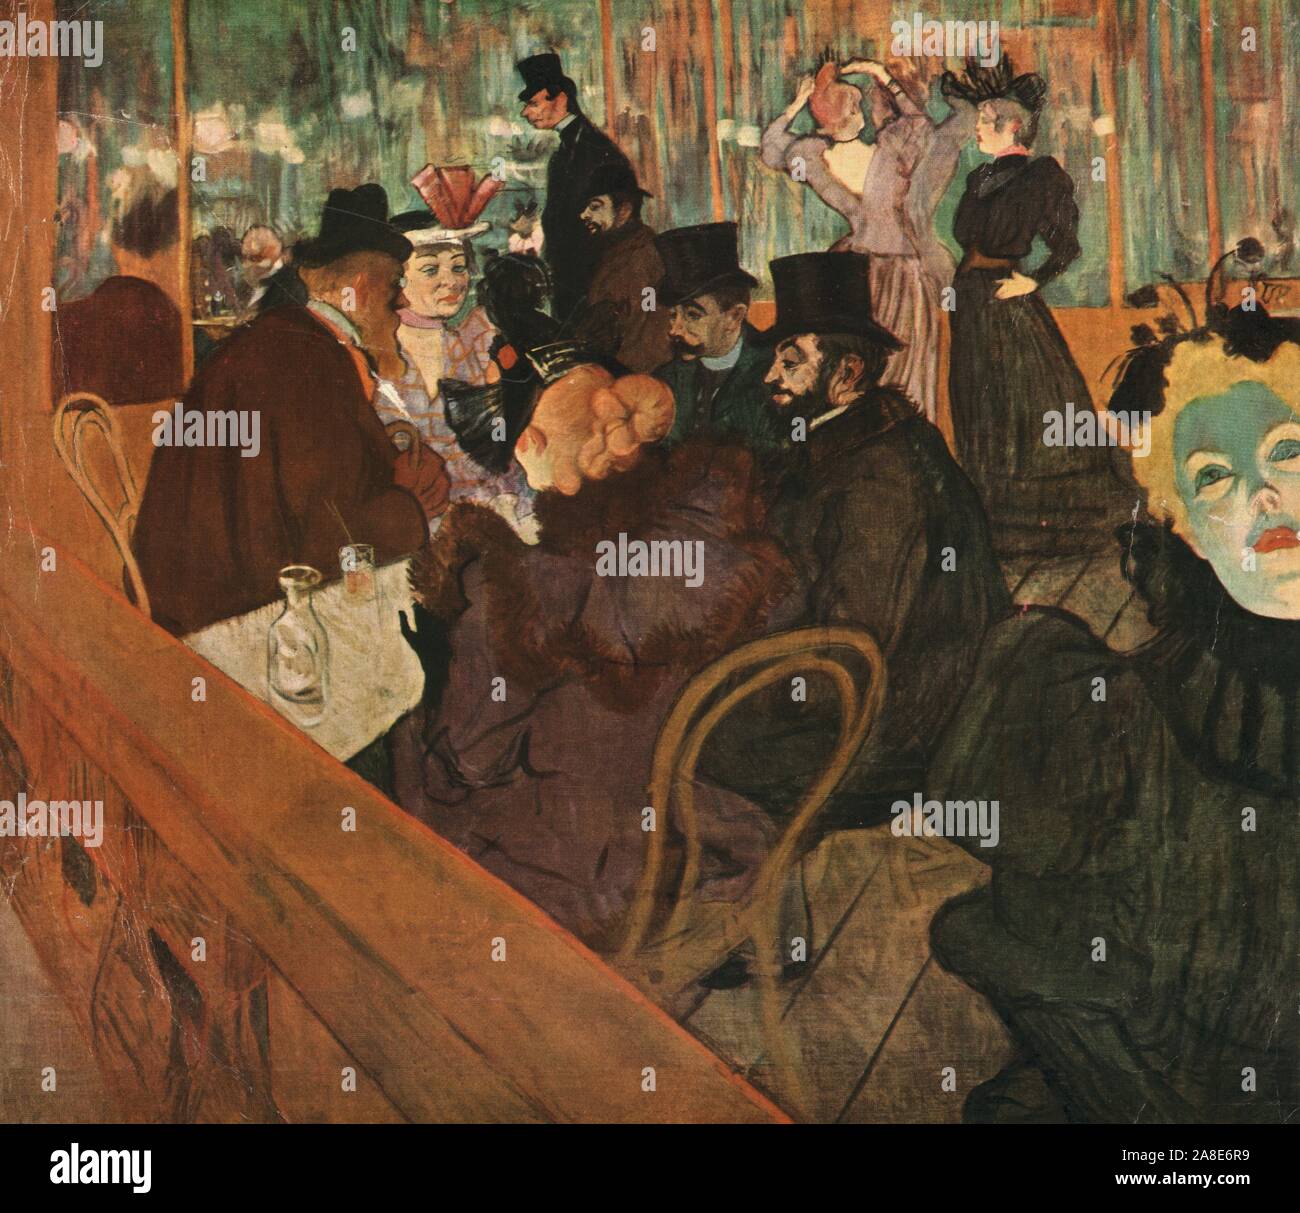 'At the Moulin Rouge', 1892, (1952). Scene in the Moulin Rouge cabaret in Paris: dancers Jane Avril (with red hair), May Milton (far right), and La Goulue in the background. Also seated at the table are Lautrec himself and his cousinDr Gabriel Tapi&#xe9; de C&#xe9;leyran. Painting in the collection of the Art Institute of Chicago, USA. From &quot;Henri De Toulouse-Lautrec&quot; by Douglas Cooper. [Thames and Hudson, London, 1952] Stock Photo